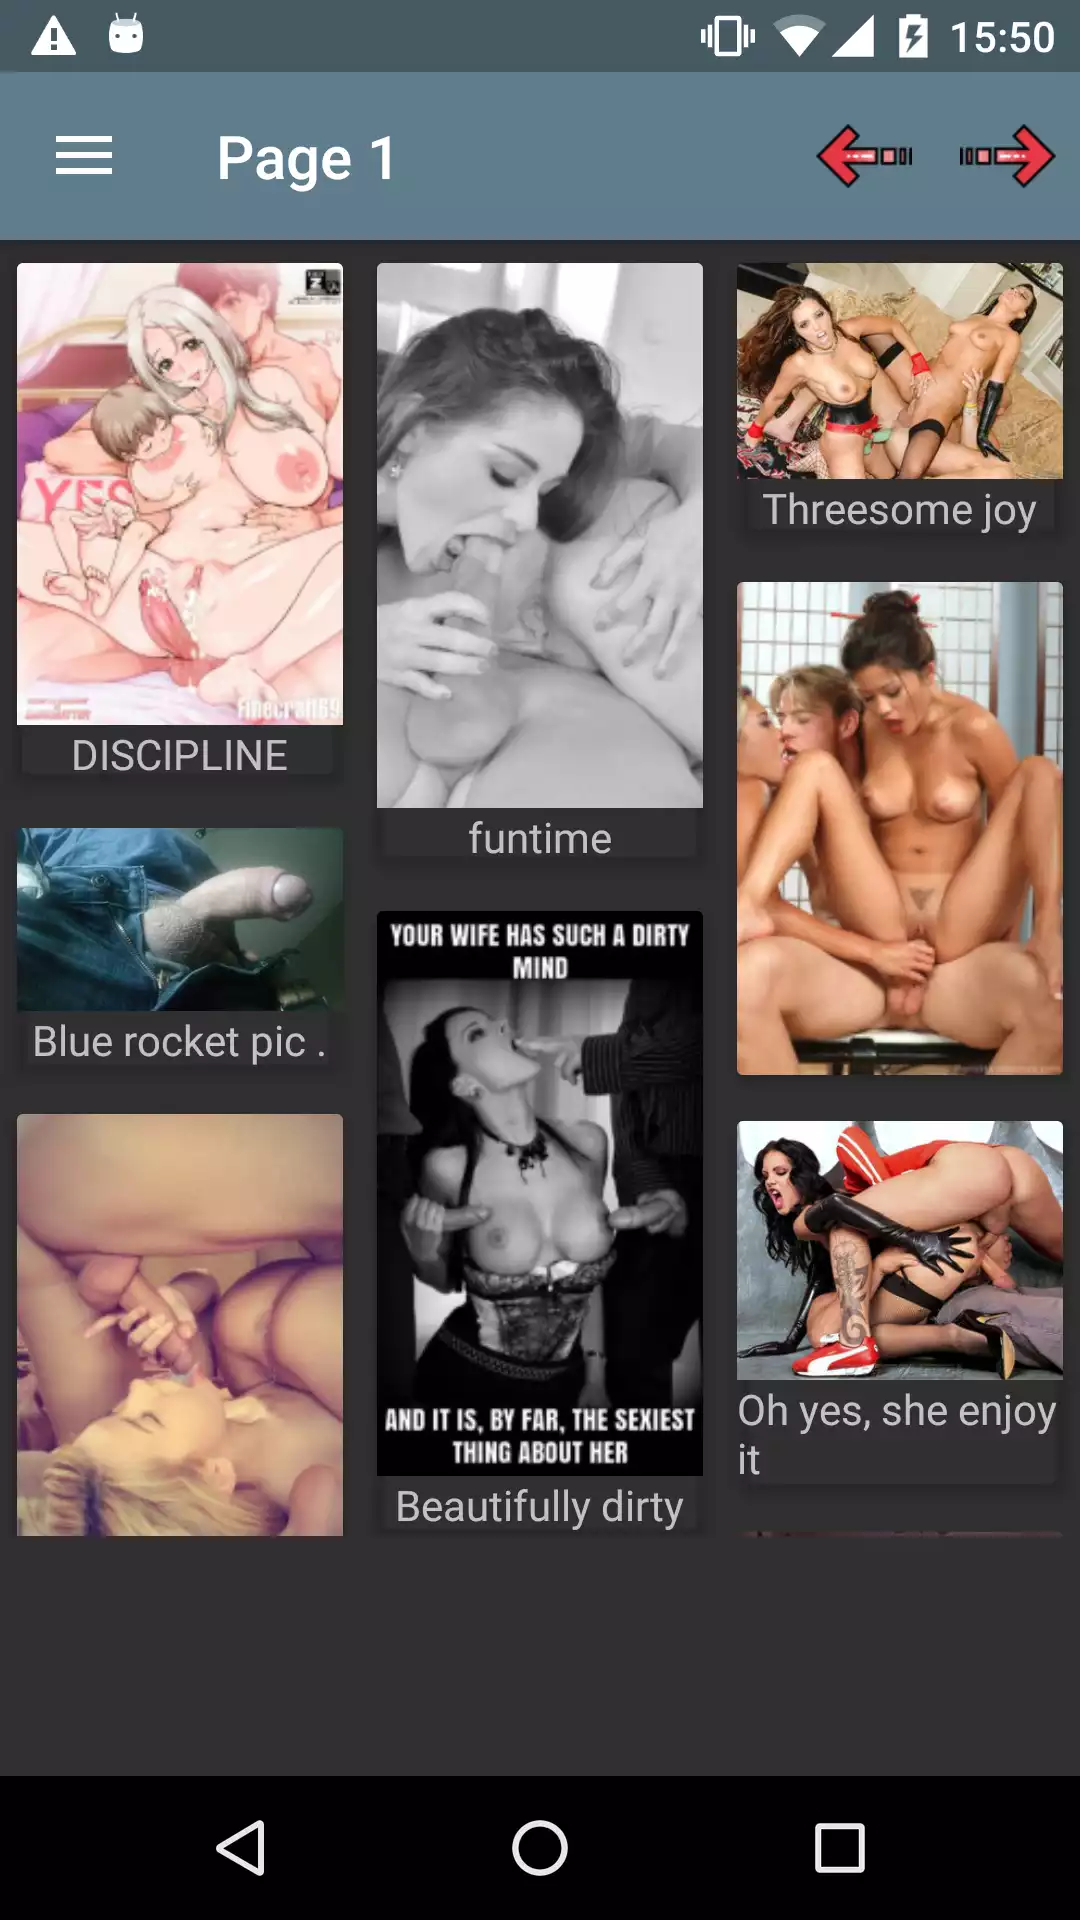 Threesomes offline,apps,images,download,pron,top,apk,photos,pics,porn,star,hot,best,app,erotic,adult,image,manga,hentai,galleries,android,wallpaper,sexy